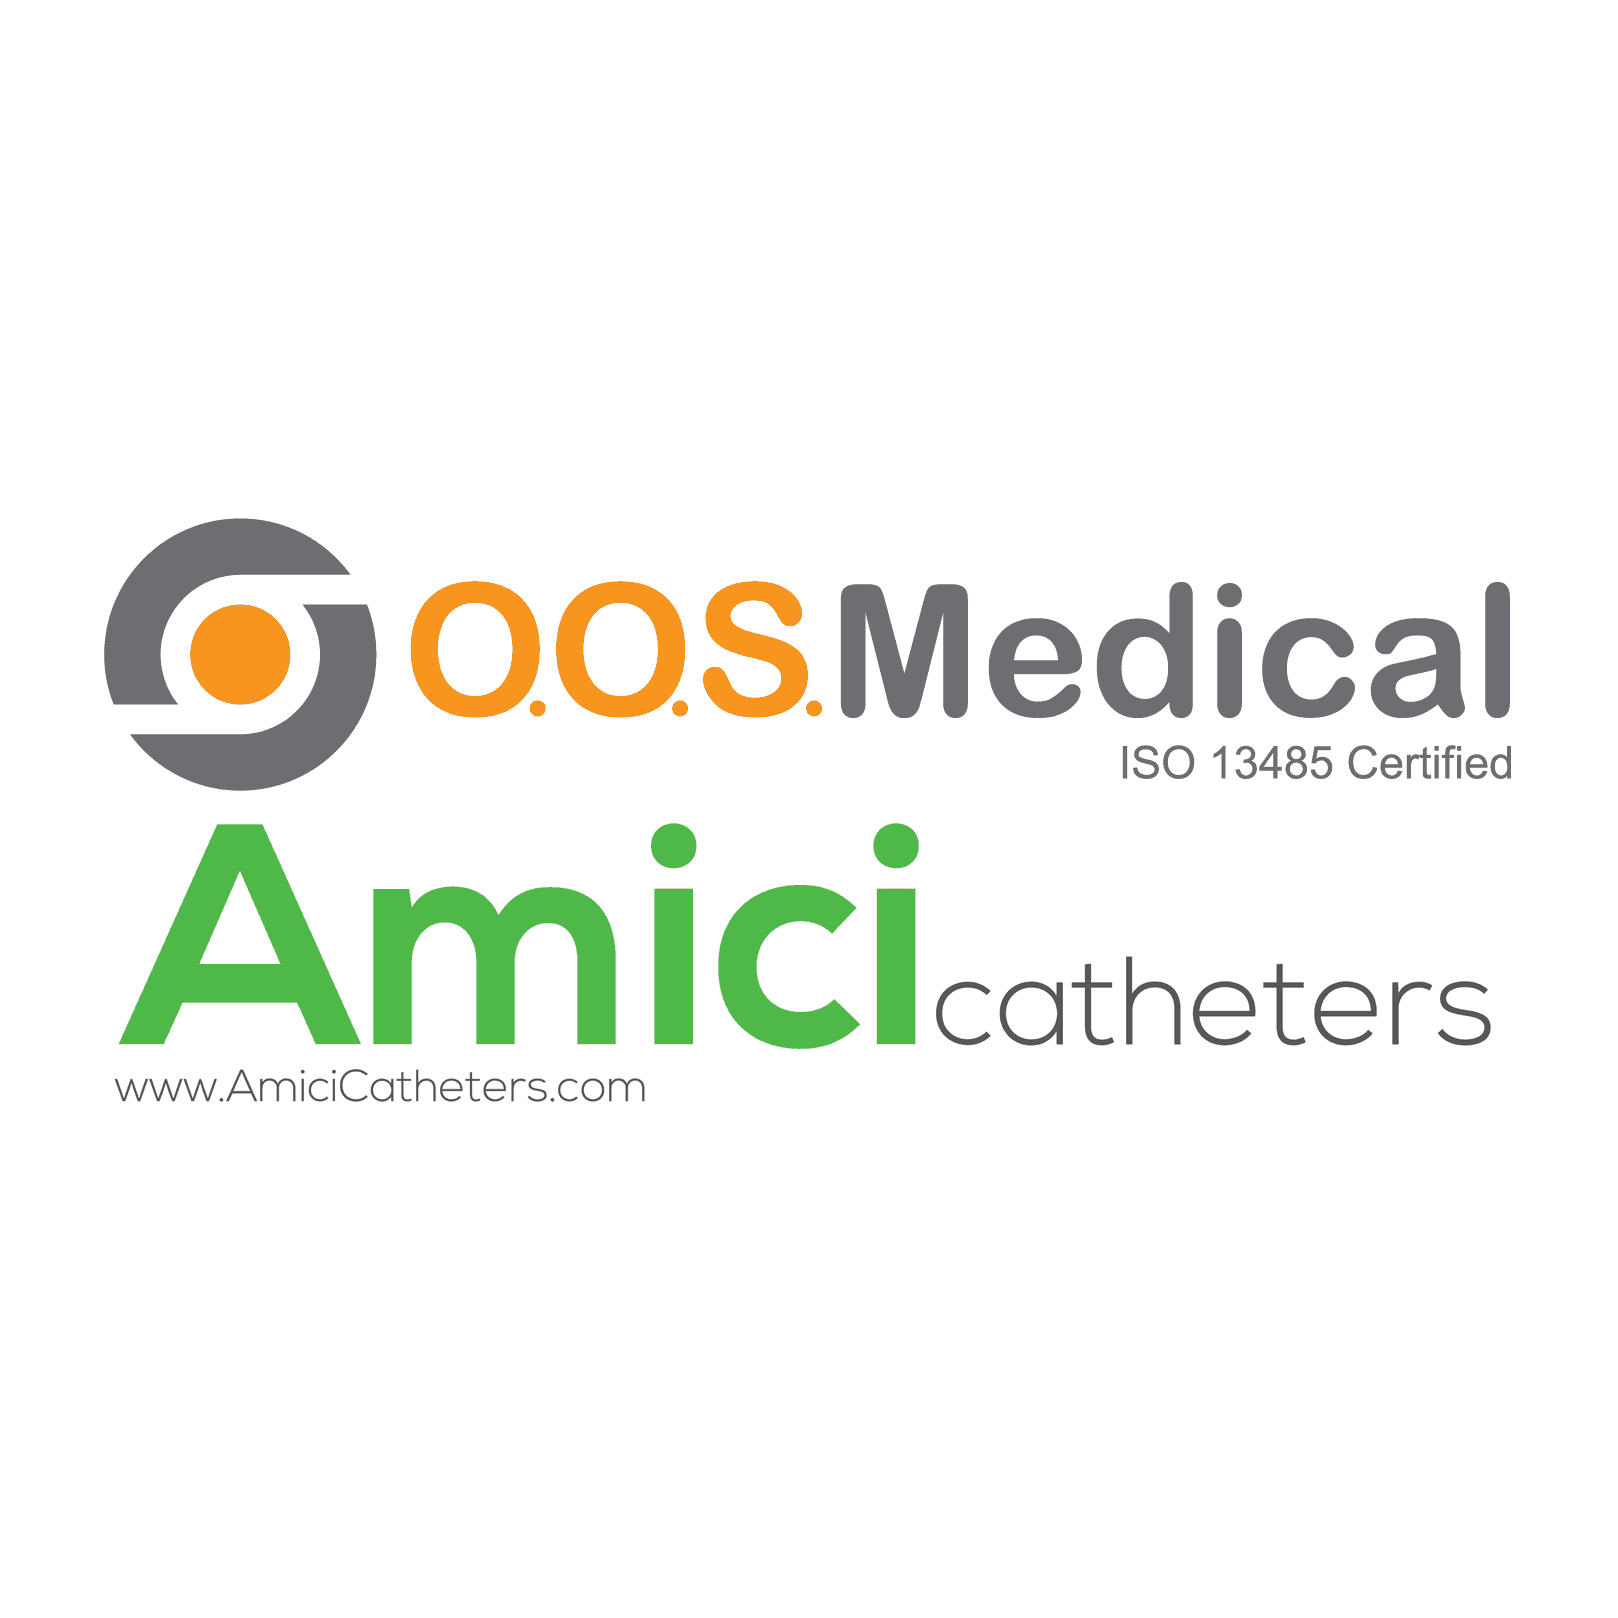 <p>Amici Catheters/OOS Medical</p> logo